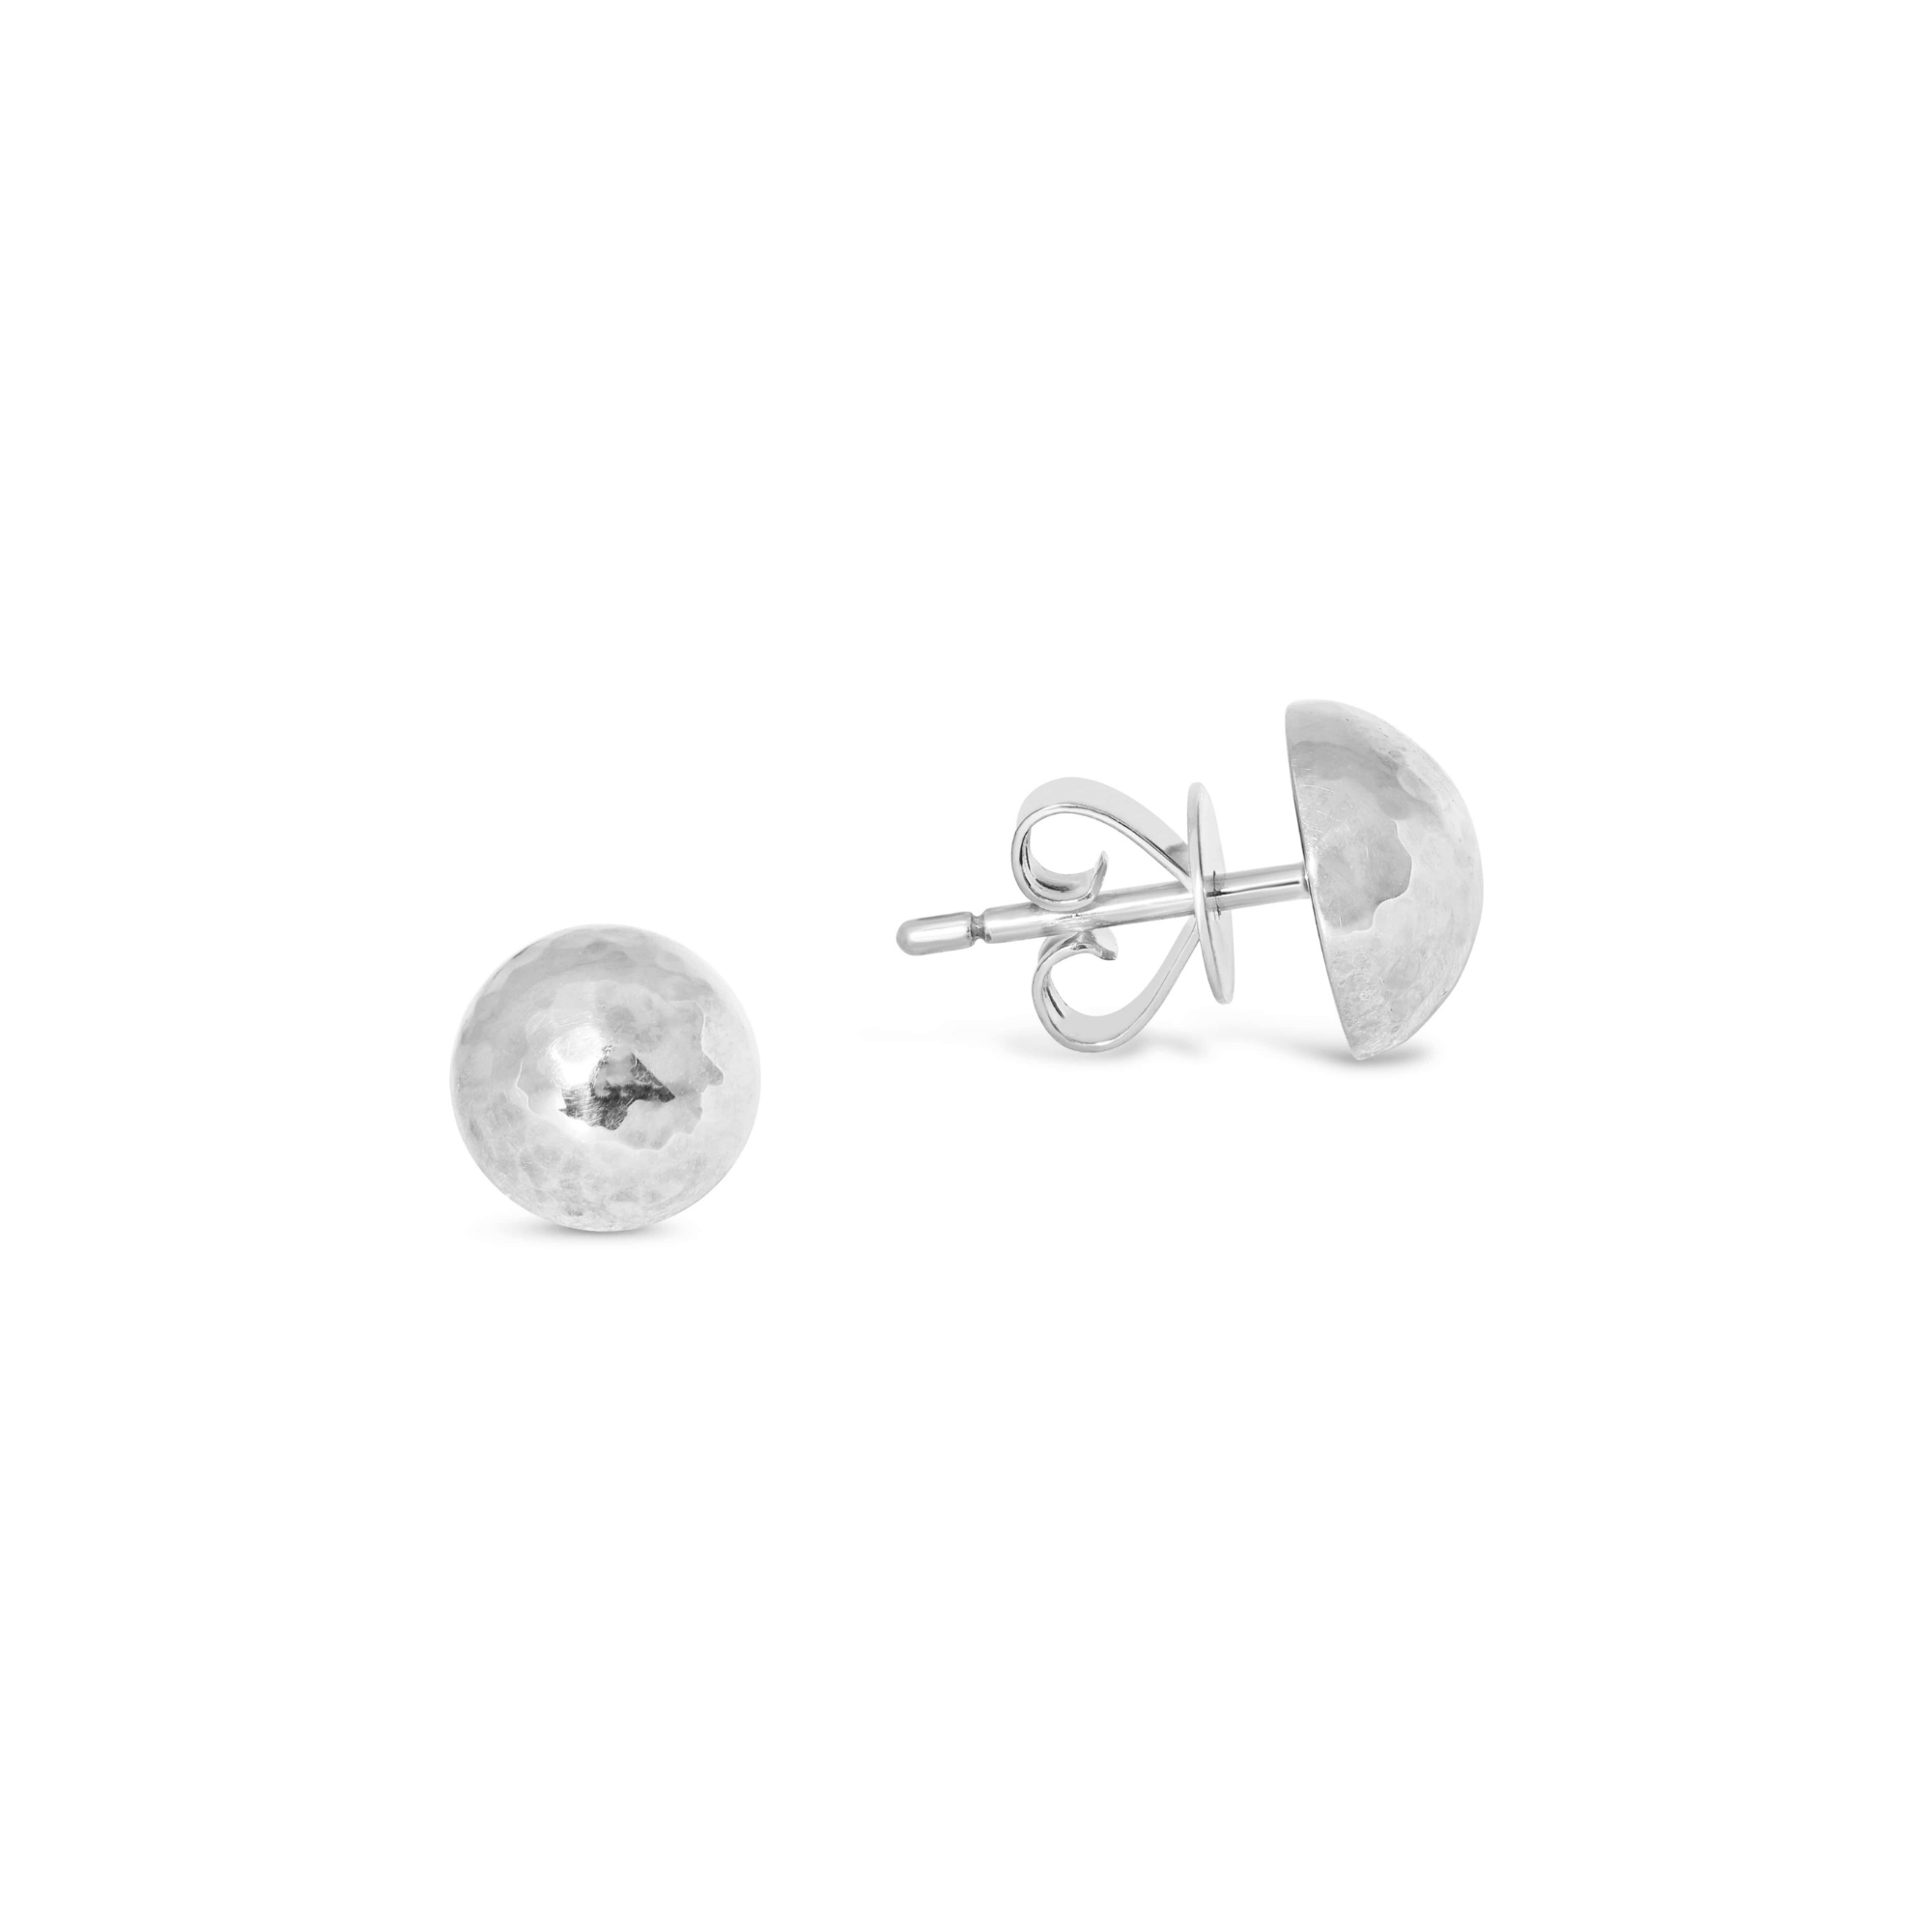 White Gold Hammered Dome Earrings